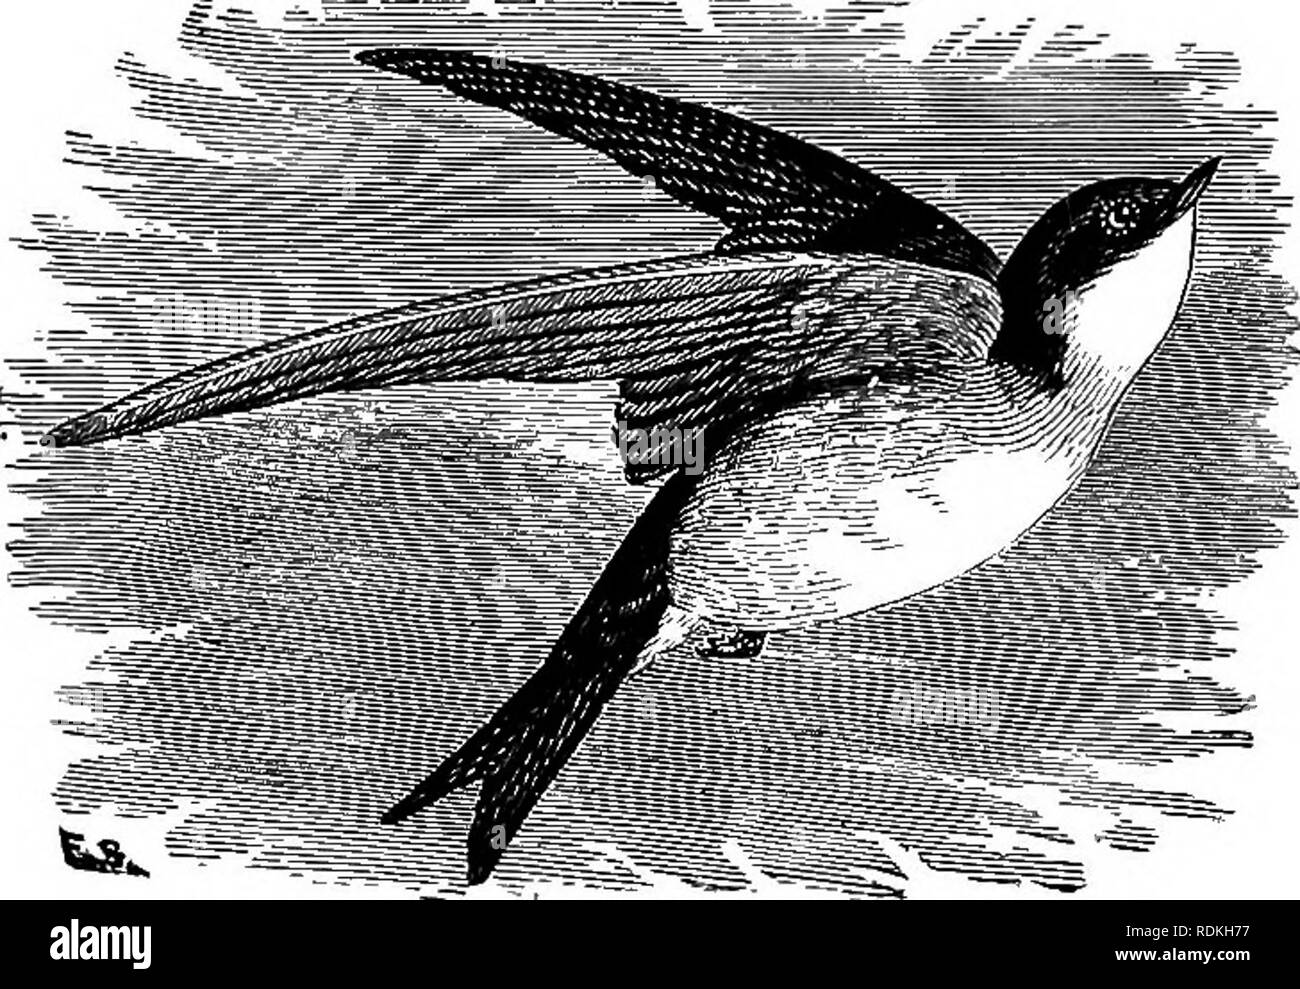 . The birds of Illinois and Wisconsin. Birds; Birds. Jan., 1909. Birds of Illinois and Wisconsin — Cory. 621 Genus IRIDOPROCNE Coues. 285. Iridoprocne bicolor (Vieill.). Tree Swallow. White-bellied Swallow. T-achycineta bicolor (Vieill.), A. 0. U. Check List, 1895, p. 258. Distr.: Whole of North America, north to Ungava, Hudson Bay, and Alaska, south in winter to Cuba and Central America; breeds from Alabama and Texas northward throughout its range. Adult male: Upper plumage, glossy greenish blue or steel-blue, showing a greenish gloss when held in the light; under parts, white;. Tree Swallow. Stock Photo